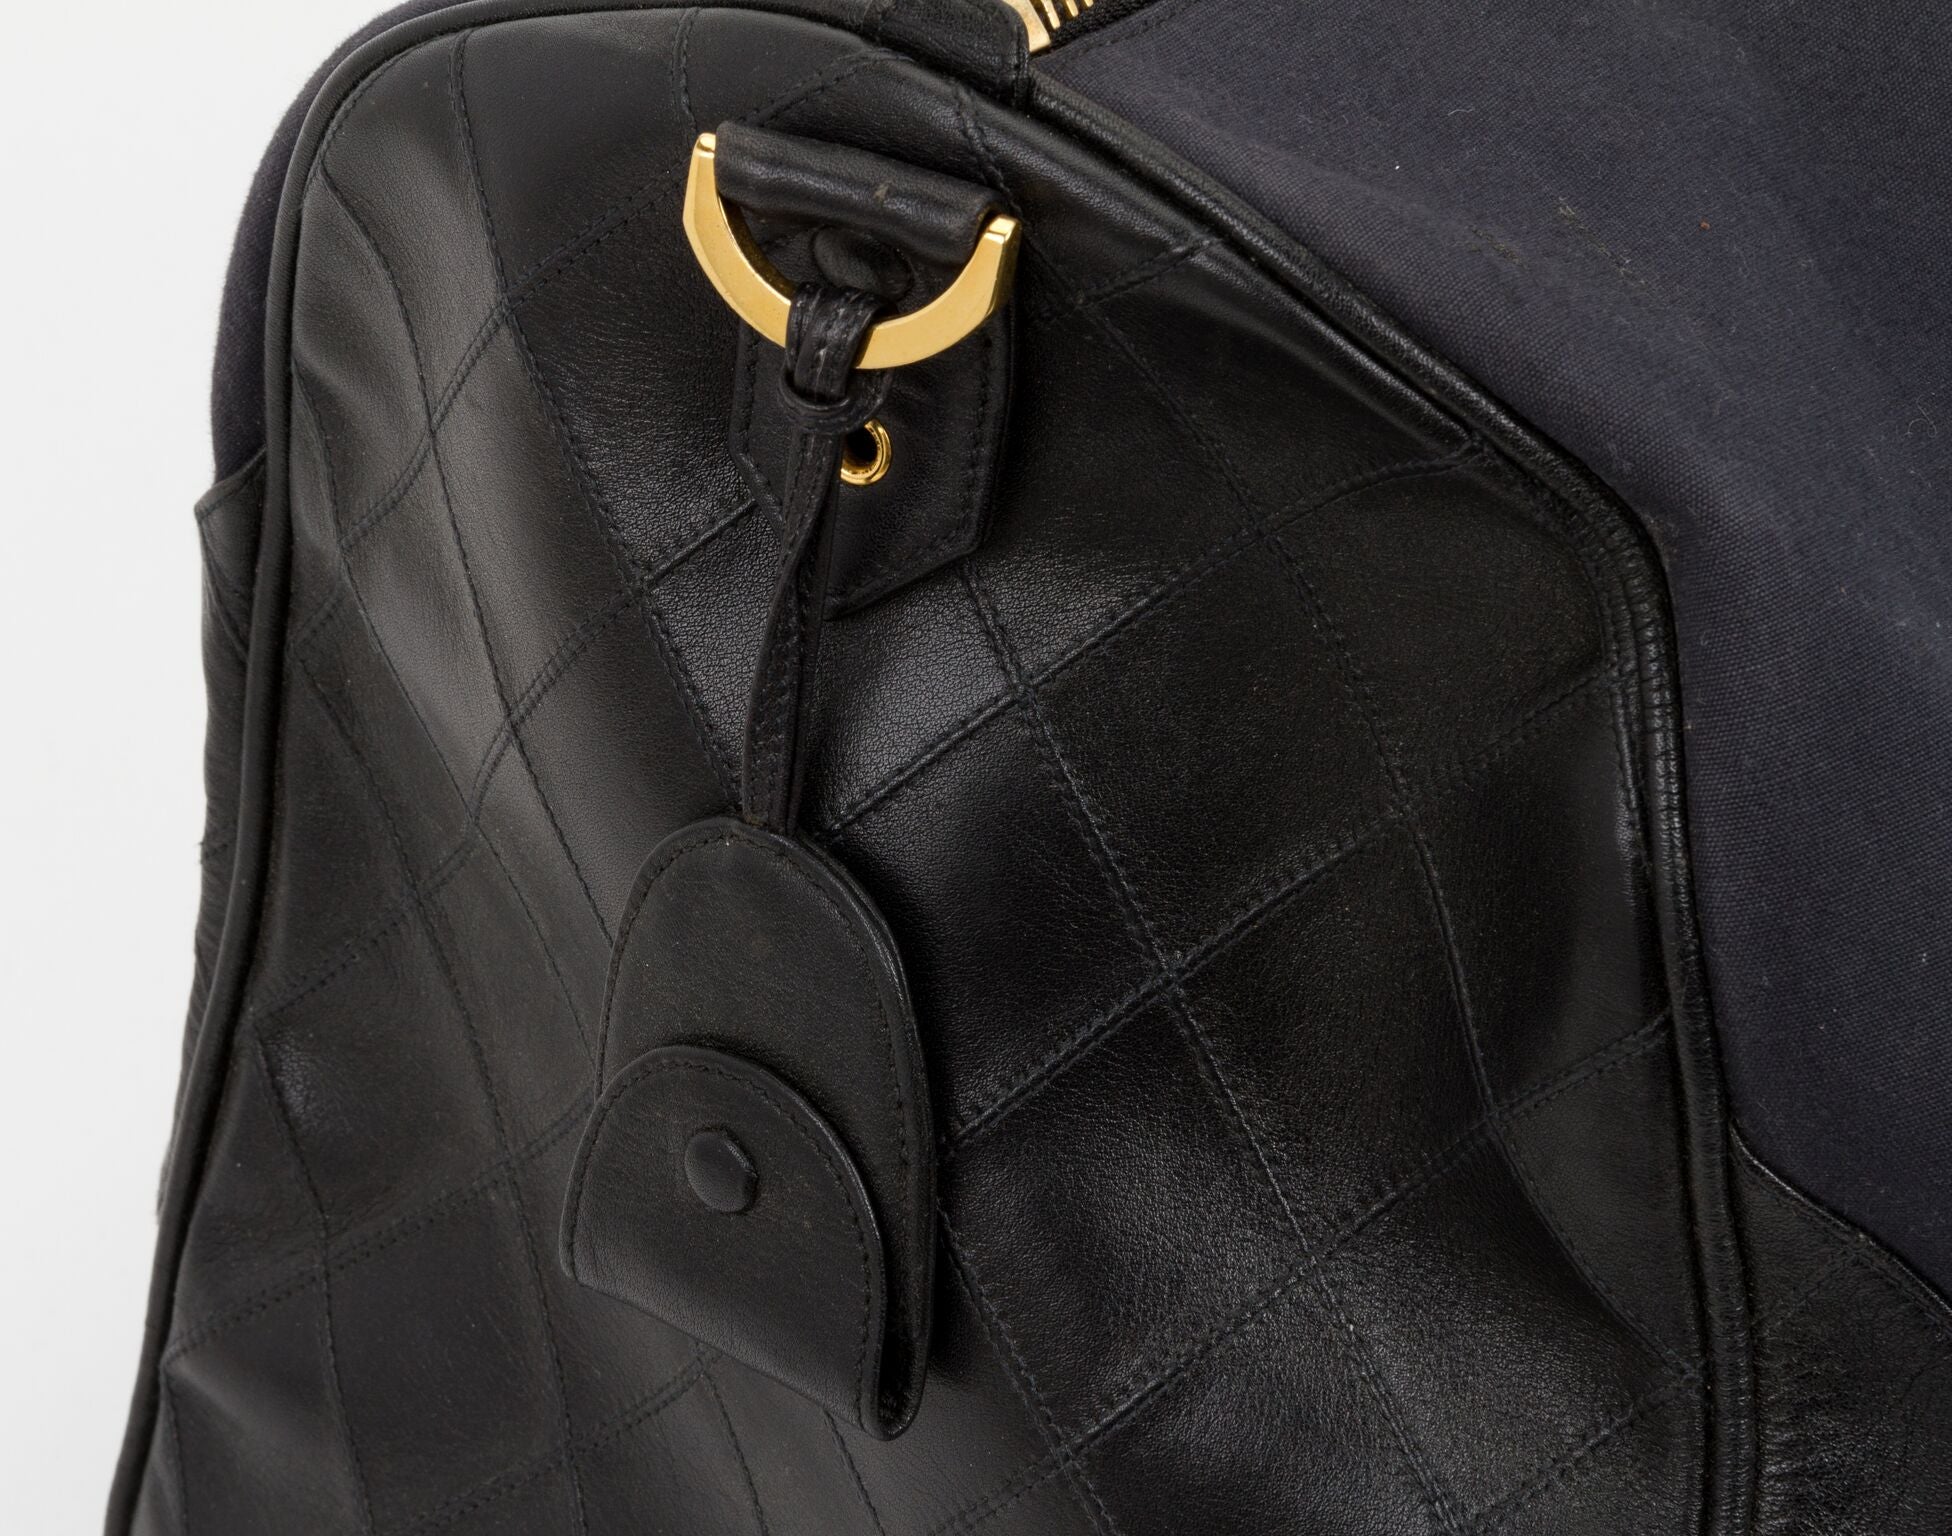 Dune Black Leather Duffle Bag, Made in Italy